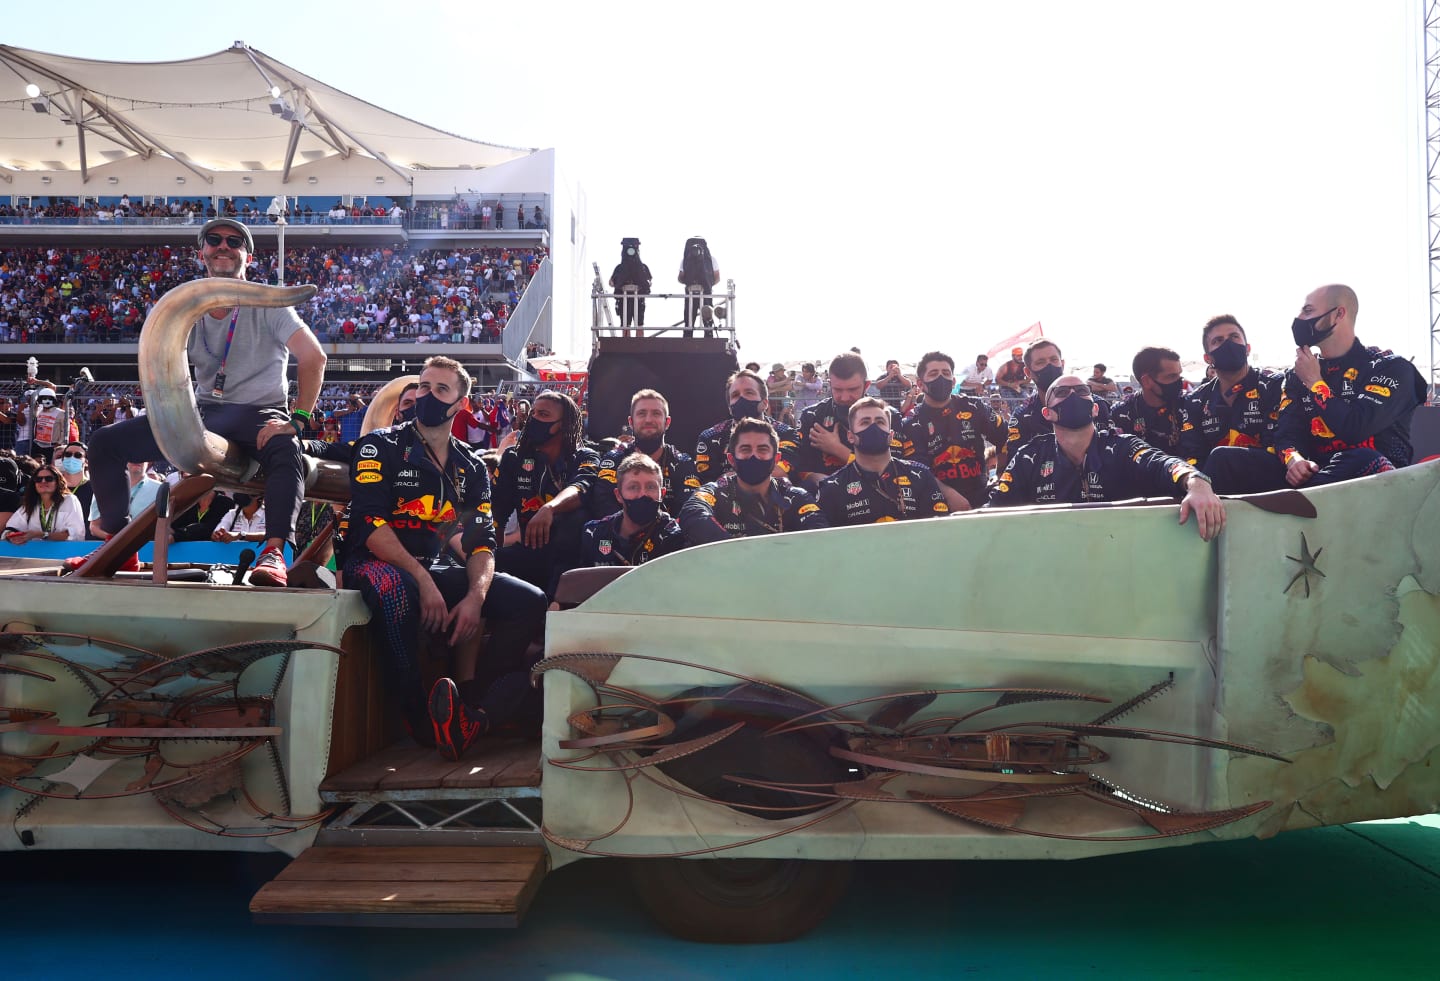 AUSTIN, TEXAS - OCTOBER 24: The Red Bull Racing team enjoy the podium celebrations during the F1 Grand Prix of USA at Circuit of The Americas on October 24, 2021 in Austin, Texas. (Photo by Mark Thompson/Getty Images)